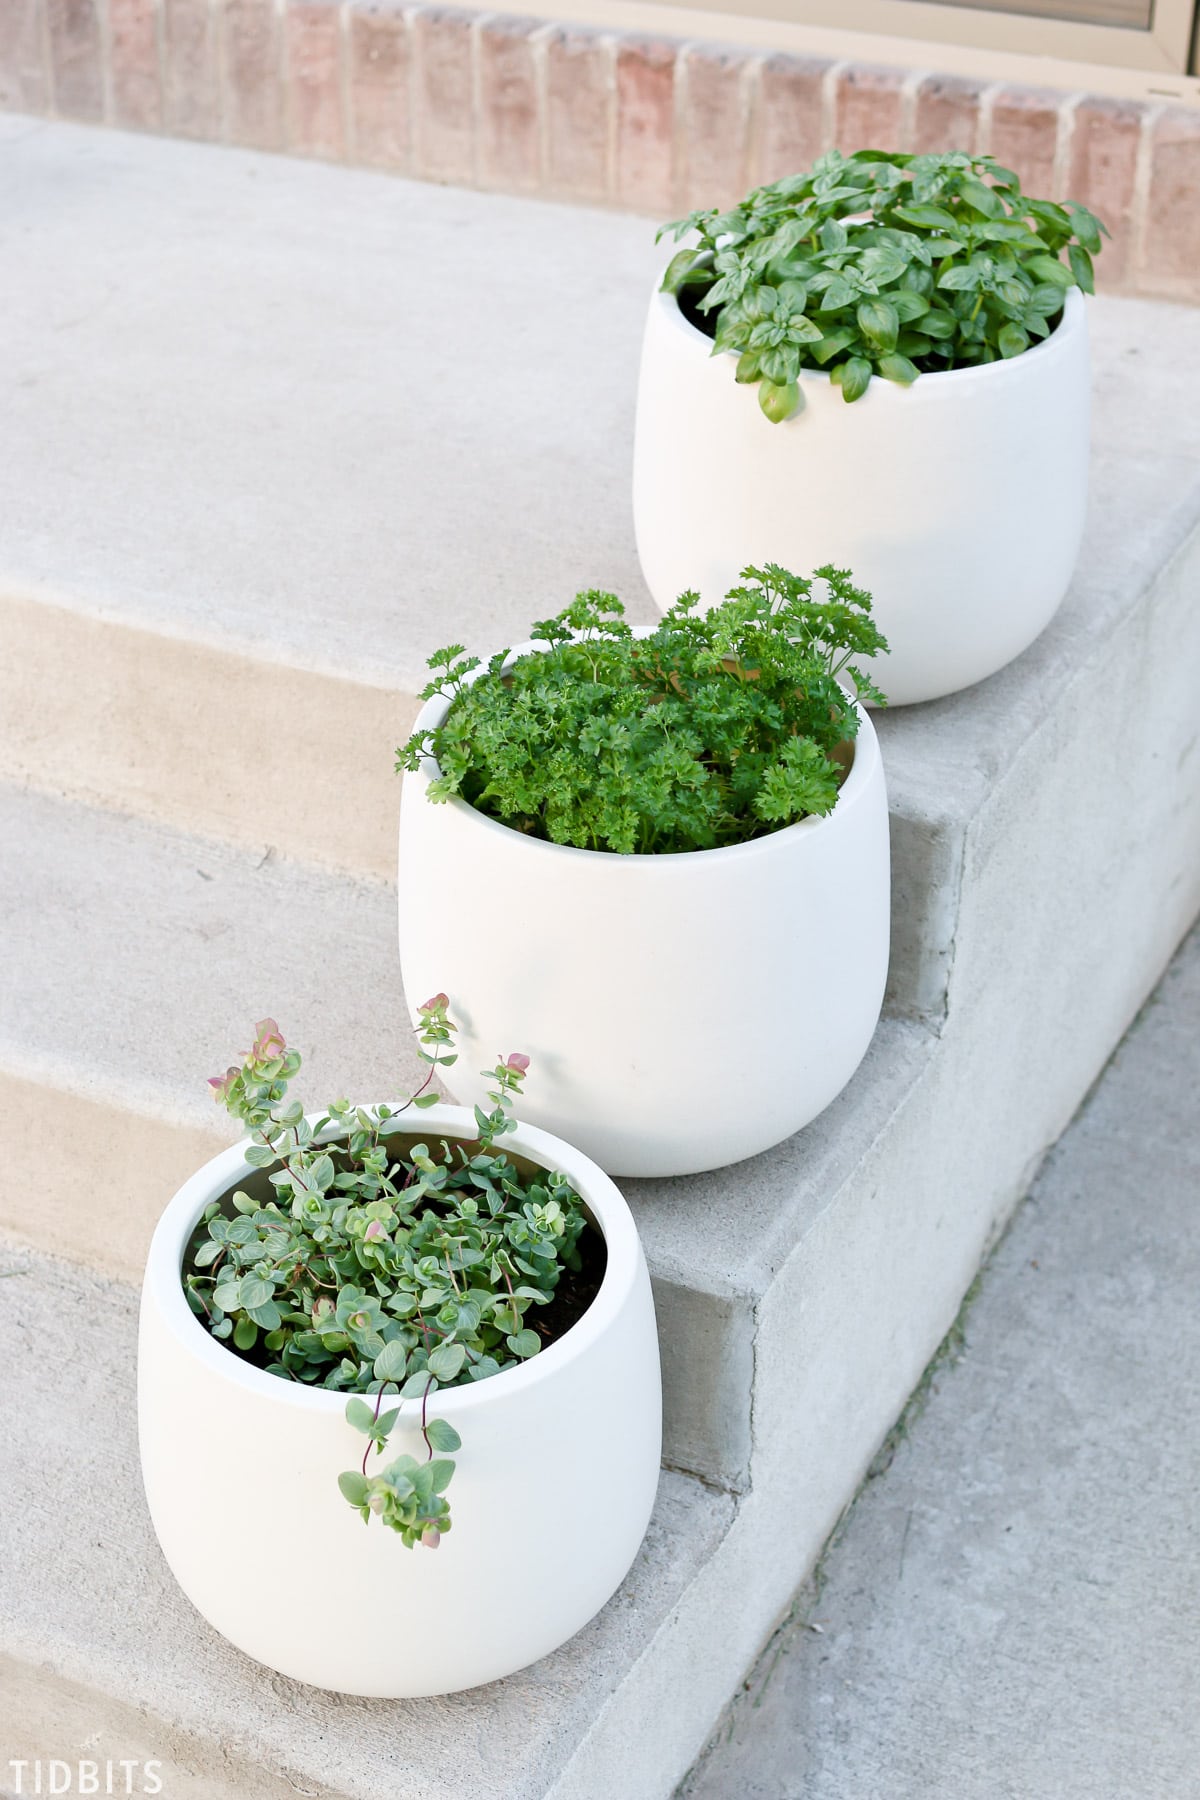 Must know tips for container herb gardening